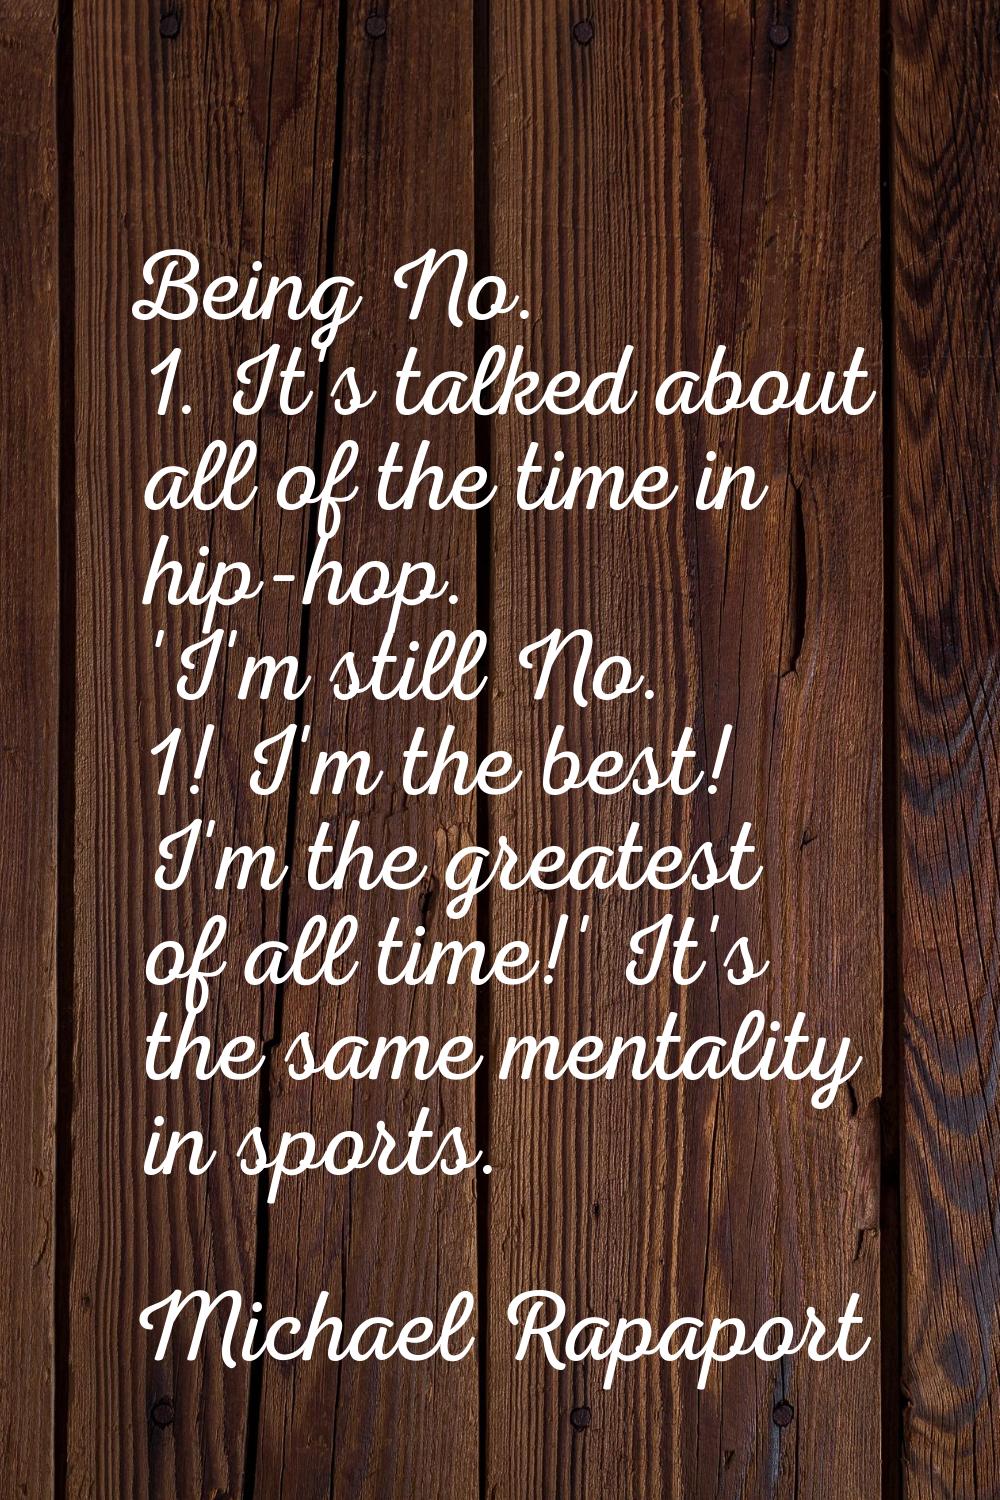 Being No. 1. It's talked about all of the time in hip-hop. 'I'm still No. 1! I'm the best! I'm the 